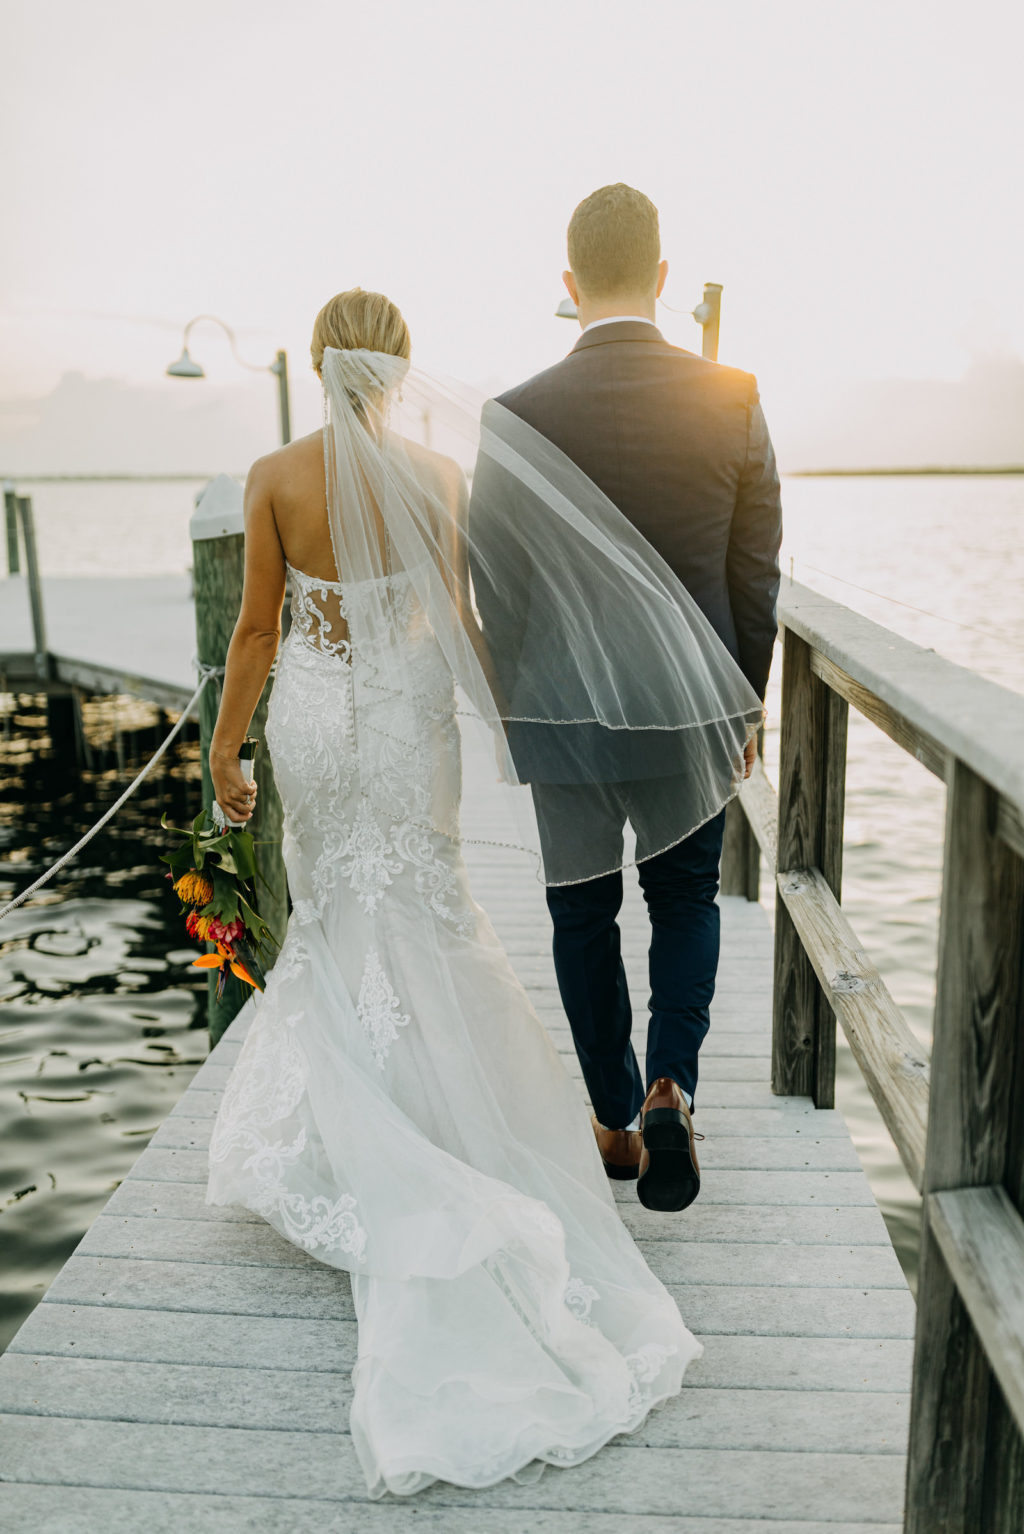 Florida Bride in Lace and Illusion Stella York Wedding Dress and Groom Walking on Pier During Sunset | Tampa Bay Wedding Photographer Amber McWhorter Photography